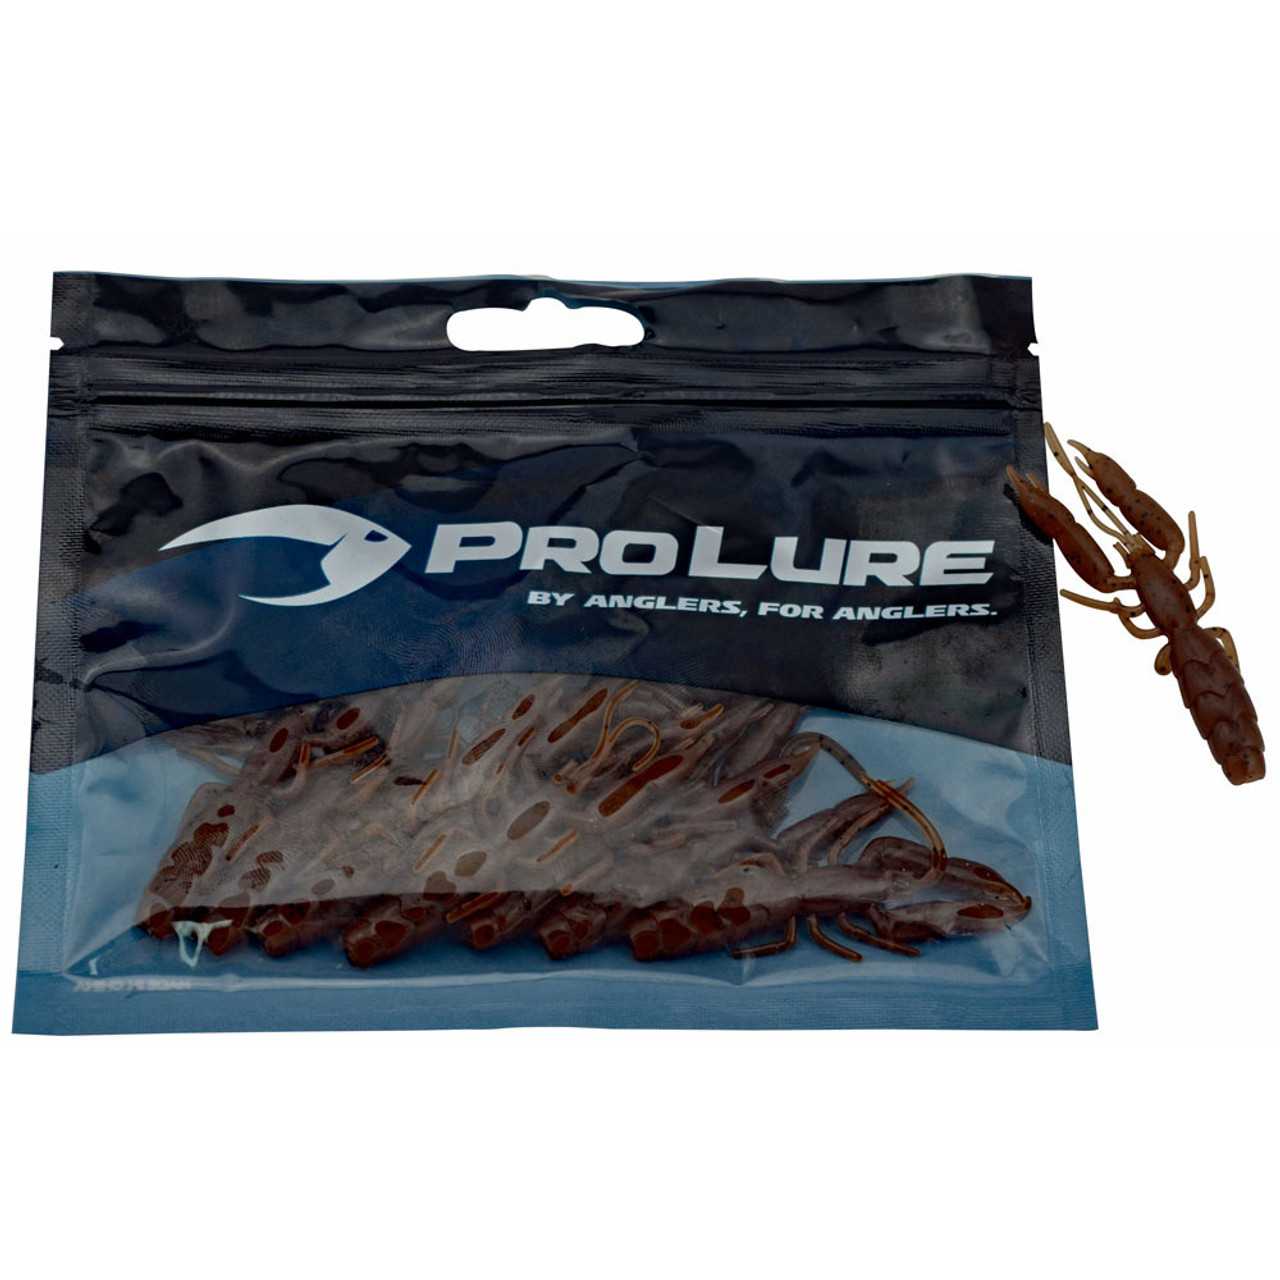 Pro Lure Live Yabbies - Soft Plastic Fishing Lures For Sale